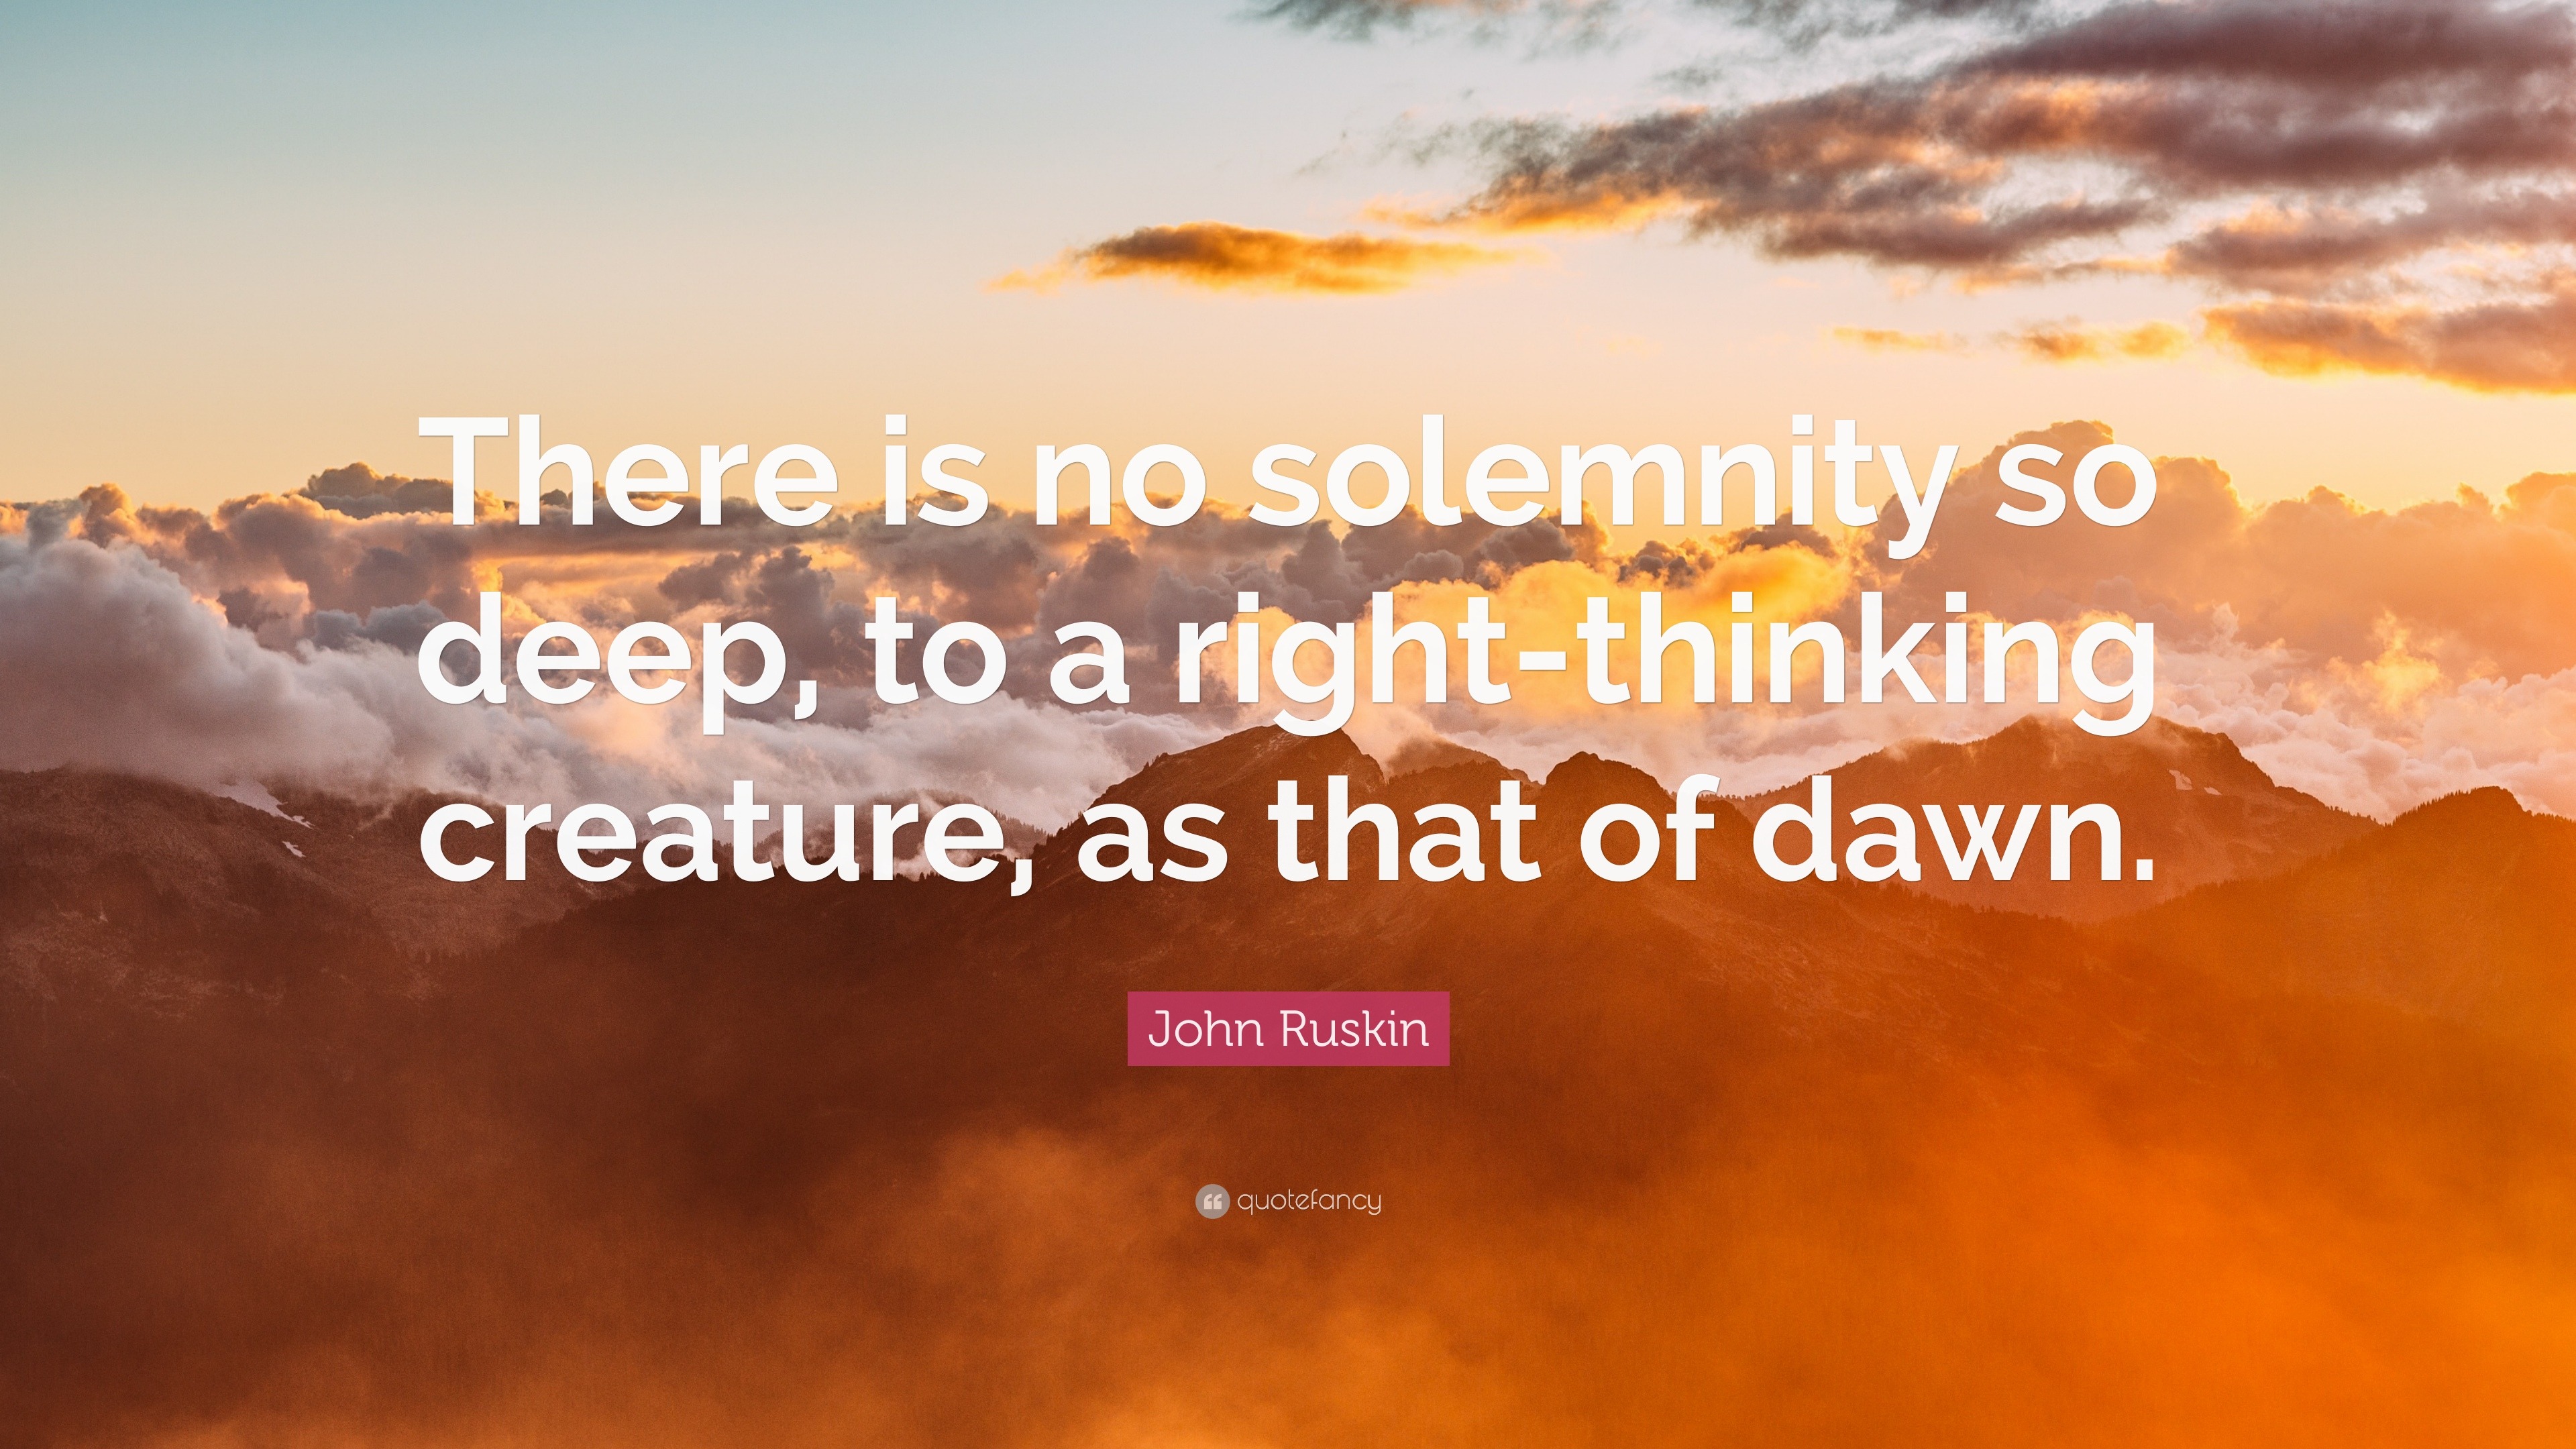 John Ruskin Quote: “There is no solemnity so deep, to a right-thinking ...